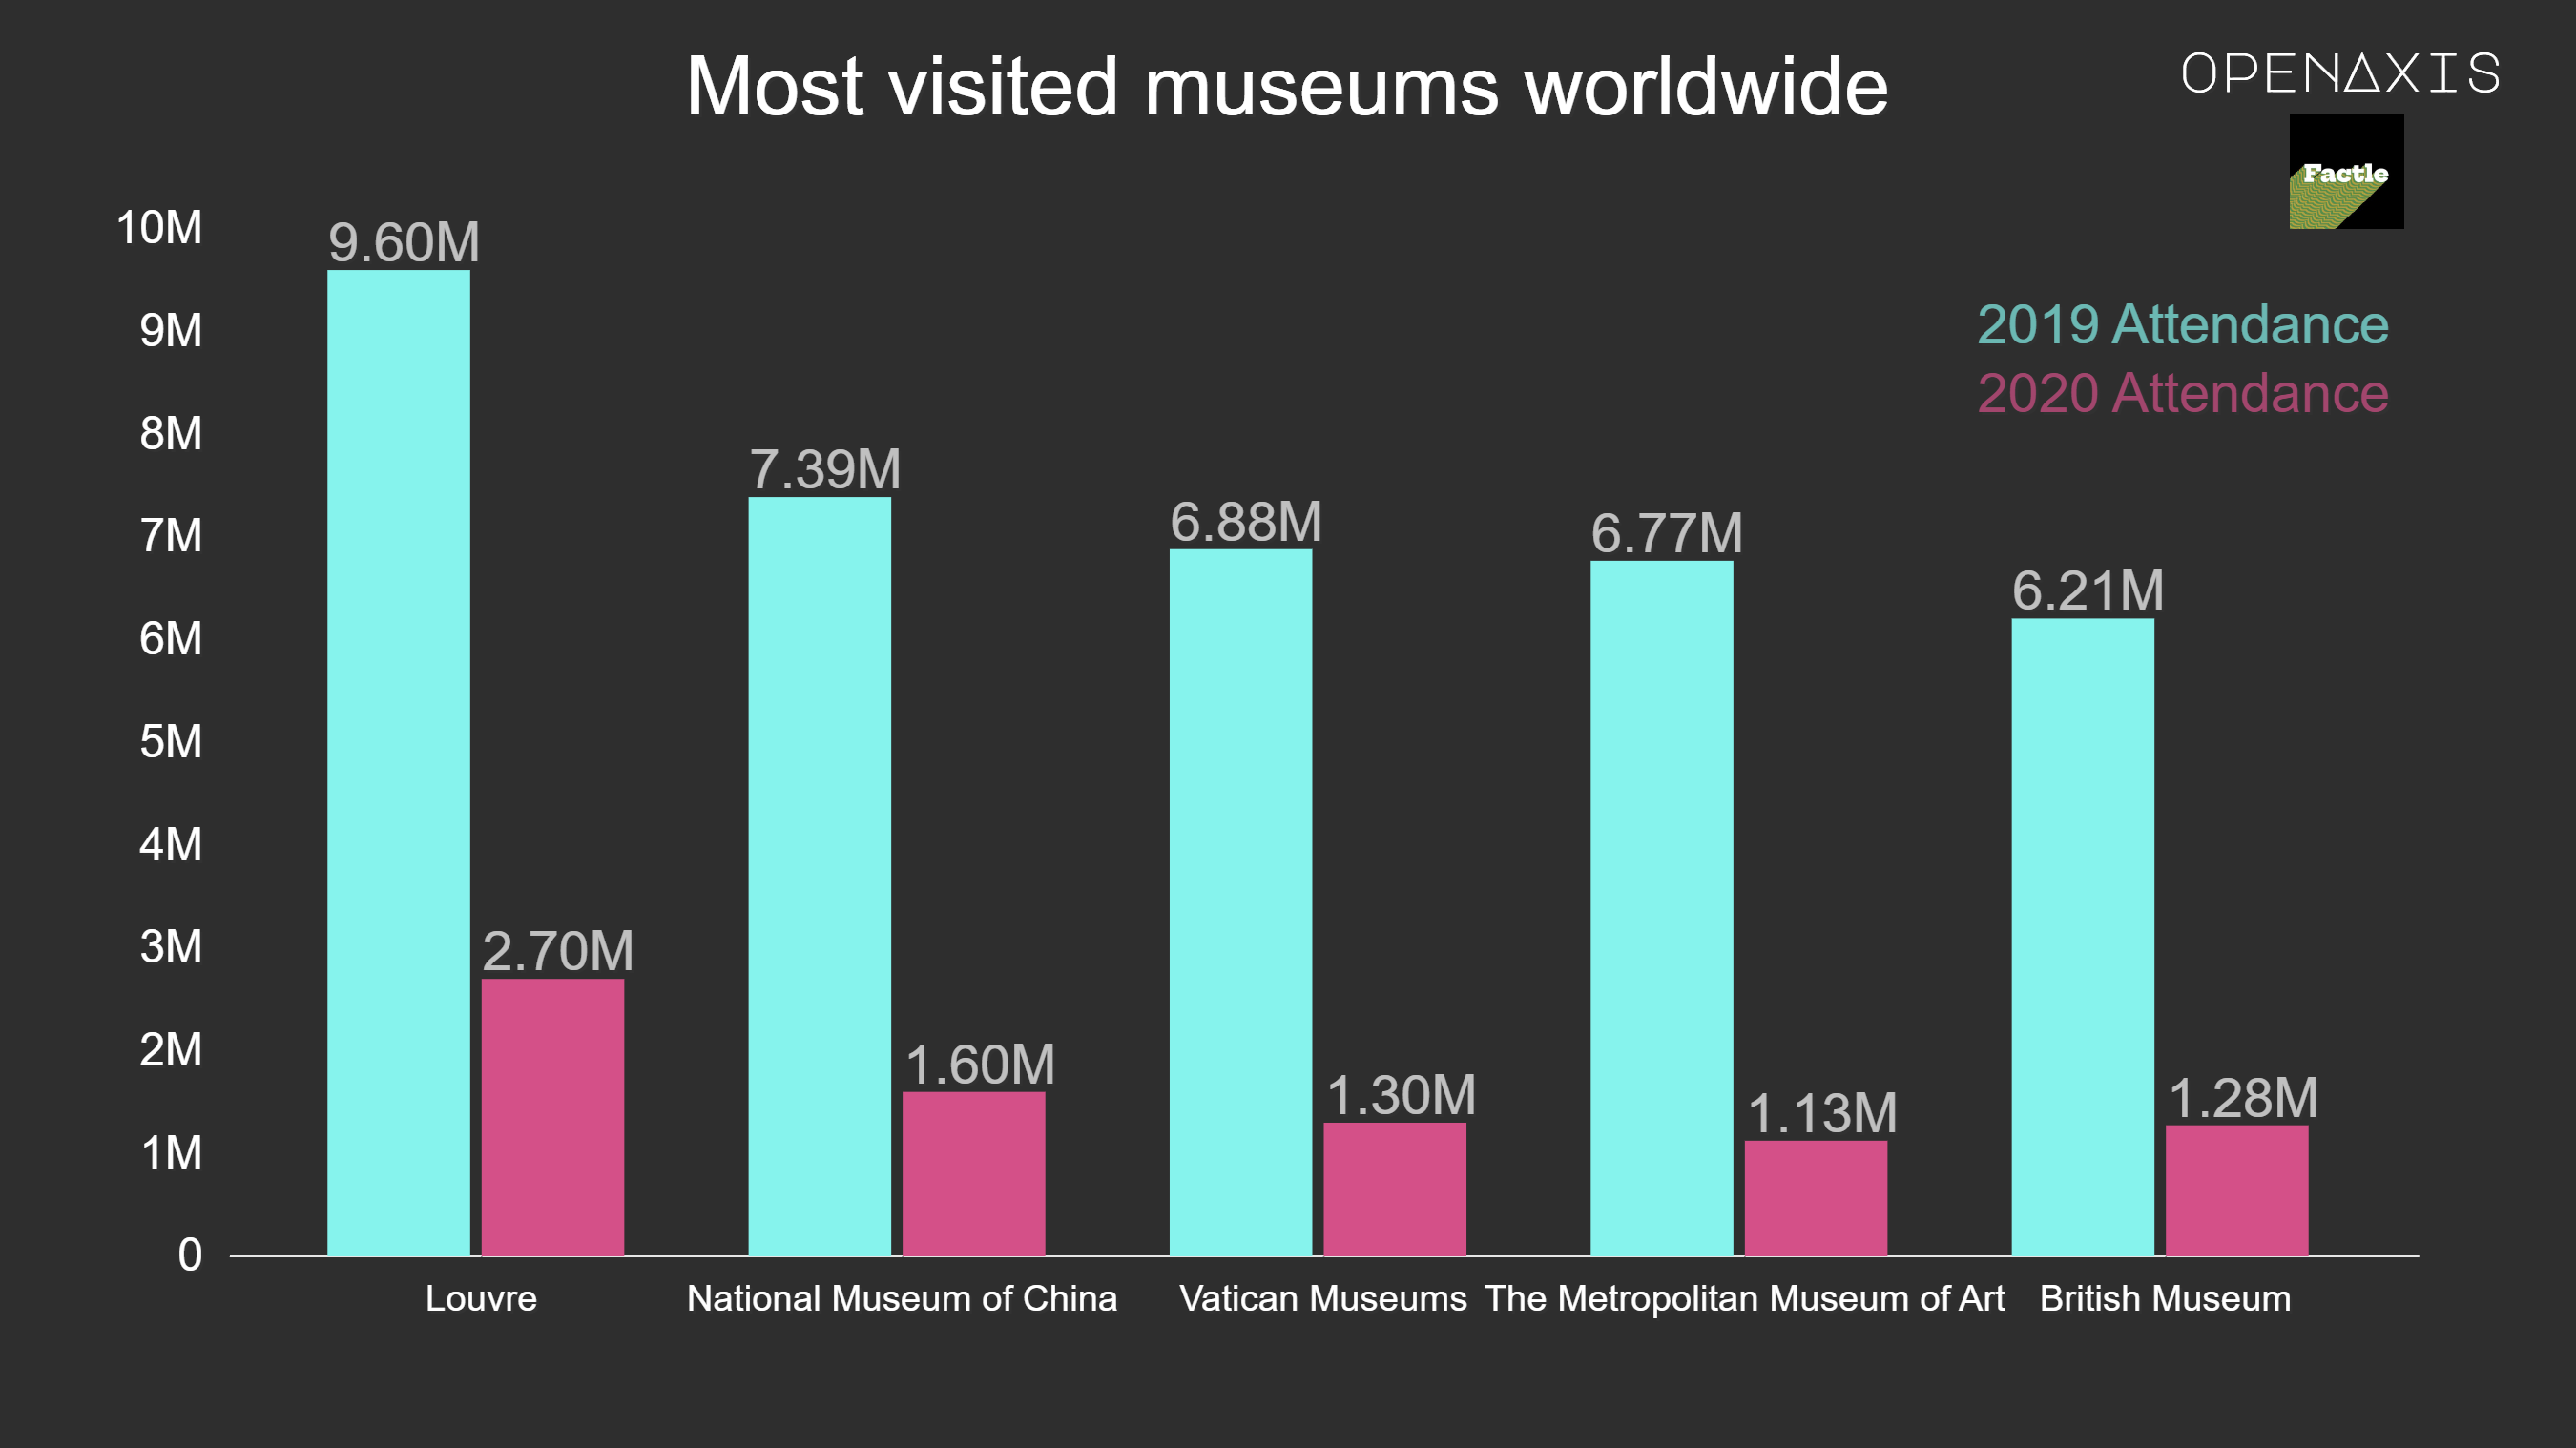 <p>Attendance at museums and galleries worldwide declined sharply in 2020 over the previous year due to the coronavirus (COVID-19) pandemic. That year, museums and similar cultural institutions around the globe had to stay close for several months as governments implemented emergency restrictions to limit the spread of the virus.</p><p><br /></p><p>Overall, the Louvre in Paris, France, recorded the highest figure in 2020, welcoming roughly 2.7 million visitors. In 2019, it registered around 9.6 million visitors. The National Museum of China in Beijing placed second on the ranking in 2020, with 1.6 million visitors. Check out the Top 20 in the dataset below.</p><p><br /></p><p><span data-index="0" data-denotation-char data-id="0" data-value="&lt;a href=&quot;/search?q=%23museums&quot; target=_self&gt;#museums" data-link="/search?q=%23museums">﻿<span contenteditable="false"><span></span><a href="/search?q=%23museums" target="_self">#museums</a></span>﻿</span> <span data-index="0" data-denotation-char data-id="0" data-value="&lt;a href=&quot;/search?q=%23arts&quot; target=_self&gt;#arts" data-link="/search?q=%23arts">﻿<span contenteditable="false"><span></span><a href="/search?q=%23arts" target="_self">#arts</a></span>﻿</span> <span data-index="0" data-denotation-char data-id="0" data-value="&lt;a href=&quot;/search?q=%23culture&quot; target=_self&gt;#culture" data-link="/search?q=%23culture">﻿<span contenteditable="false"><span></span><a href="/search?q=%23culture" target="_self">#culture</a></span>﻿</span></p><p><br /></p><p>Source: <a href="/data/3796" target="_blank">TEA/AECOM 2020 Theme Index and Museum Index: The Global Attractions Attendance Report</a></p><p><br /></p>